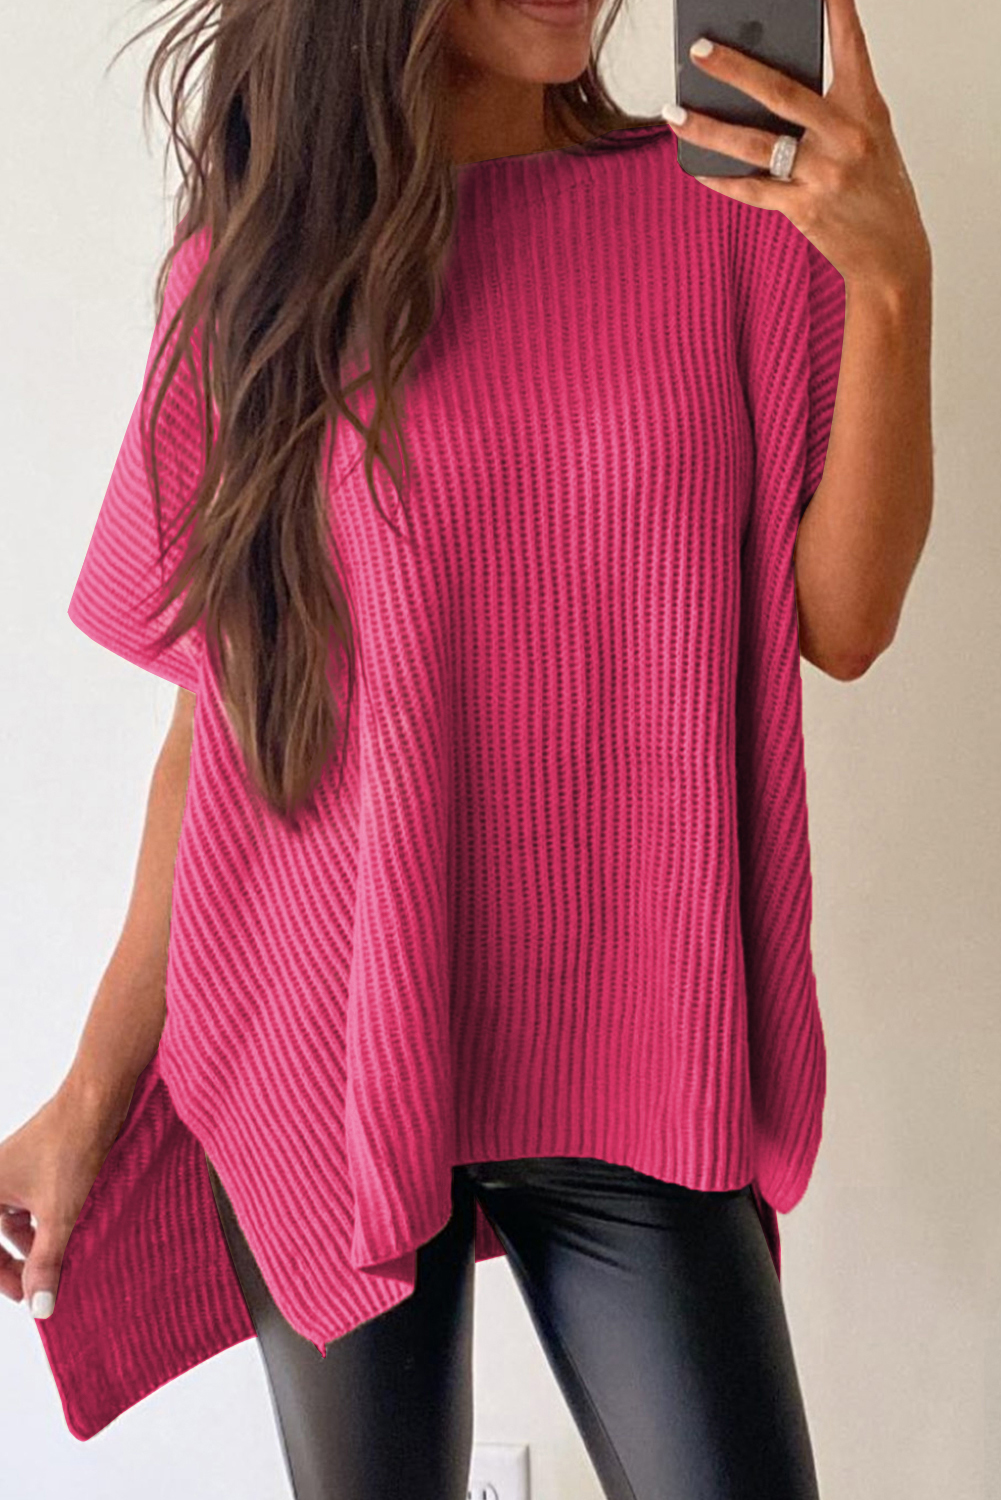 Shewin Wholesale Chic Lady Rose Red Side Slit Short Sleeve Oversized SWEATER